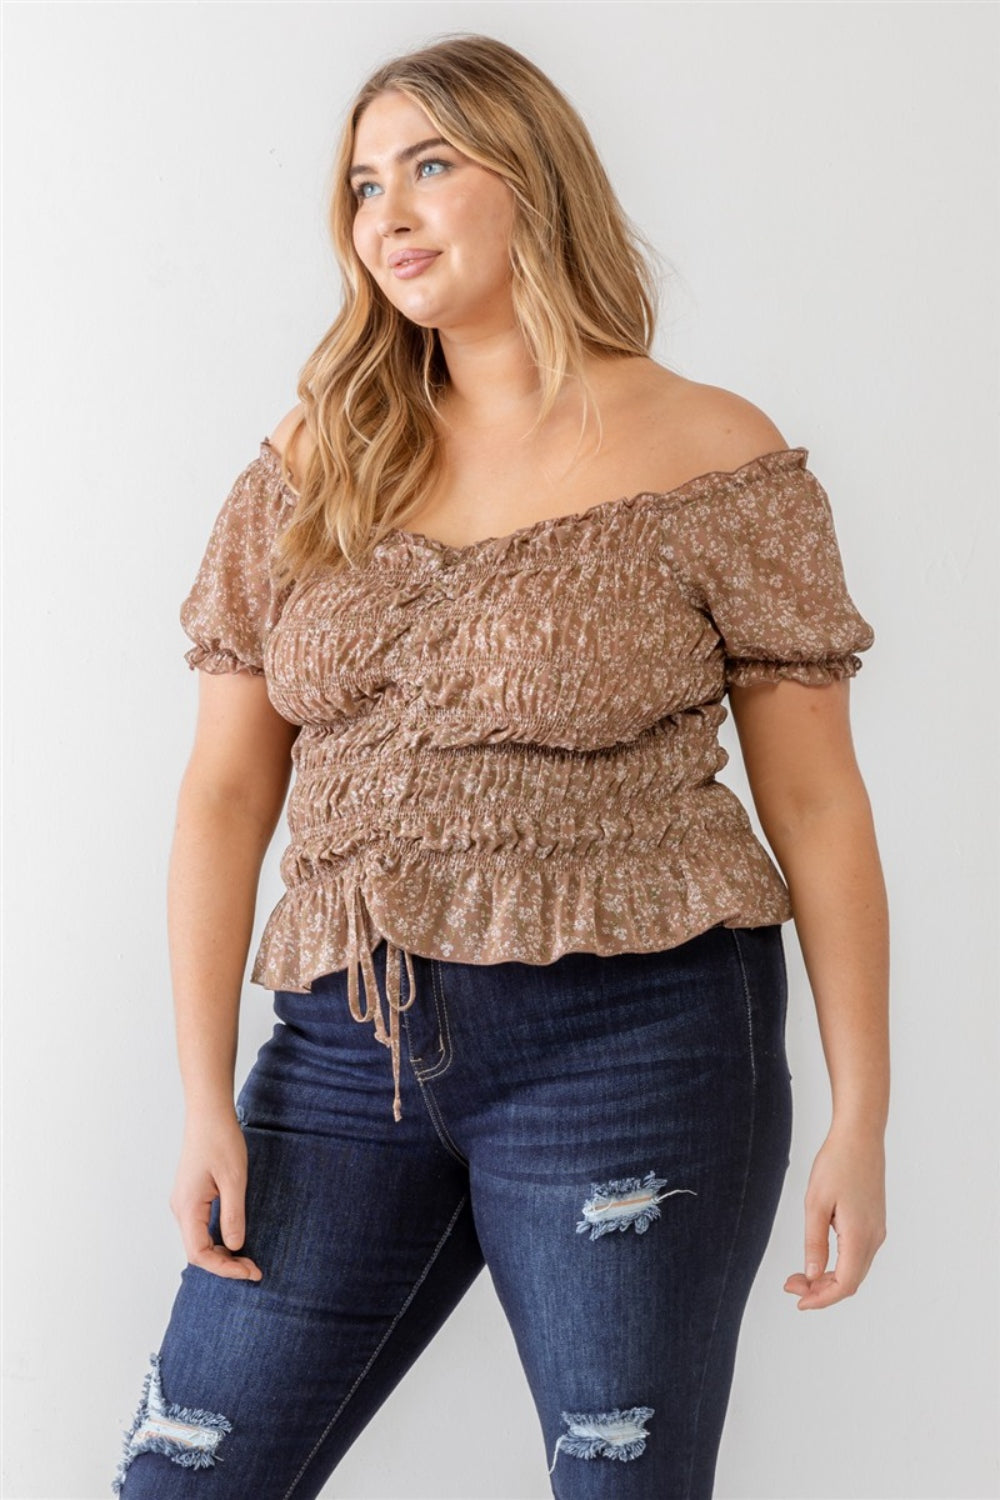 ZENOBIA PLUS SIZE FRILL RUCHED OFF THE SHOULDER SHORT SLEEVE BLOUSE